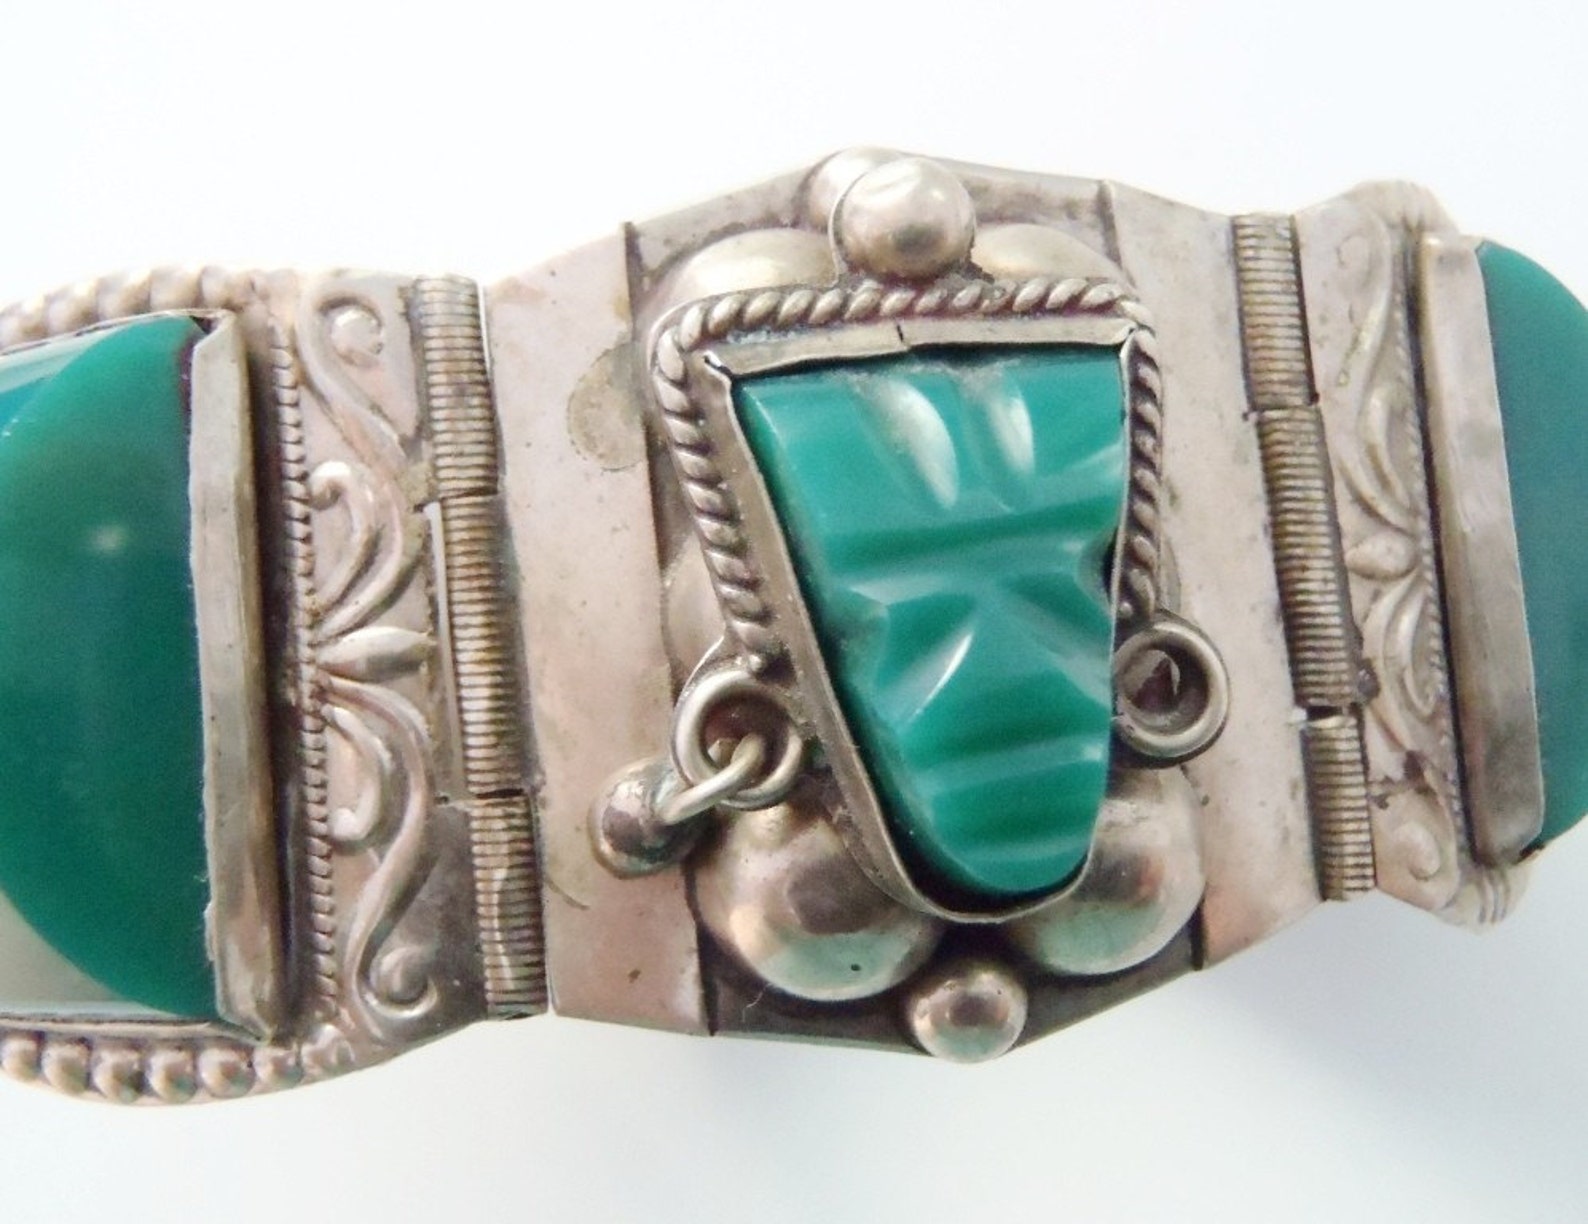 Vintage Taxco Sterling Silver Bracelet with Carved Aztec Faces | Etsy